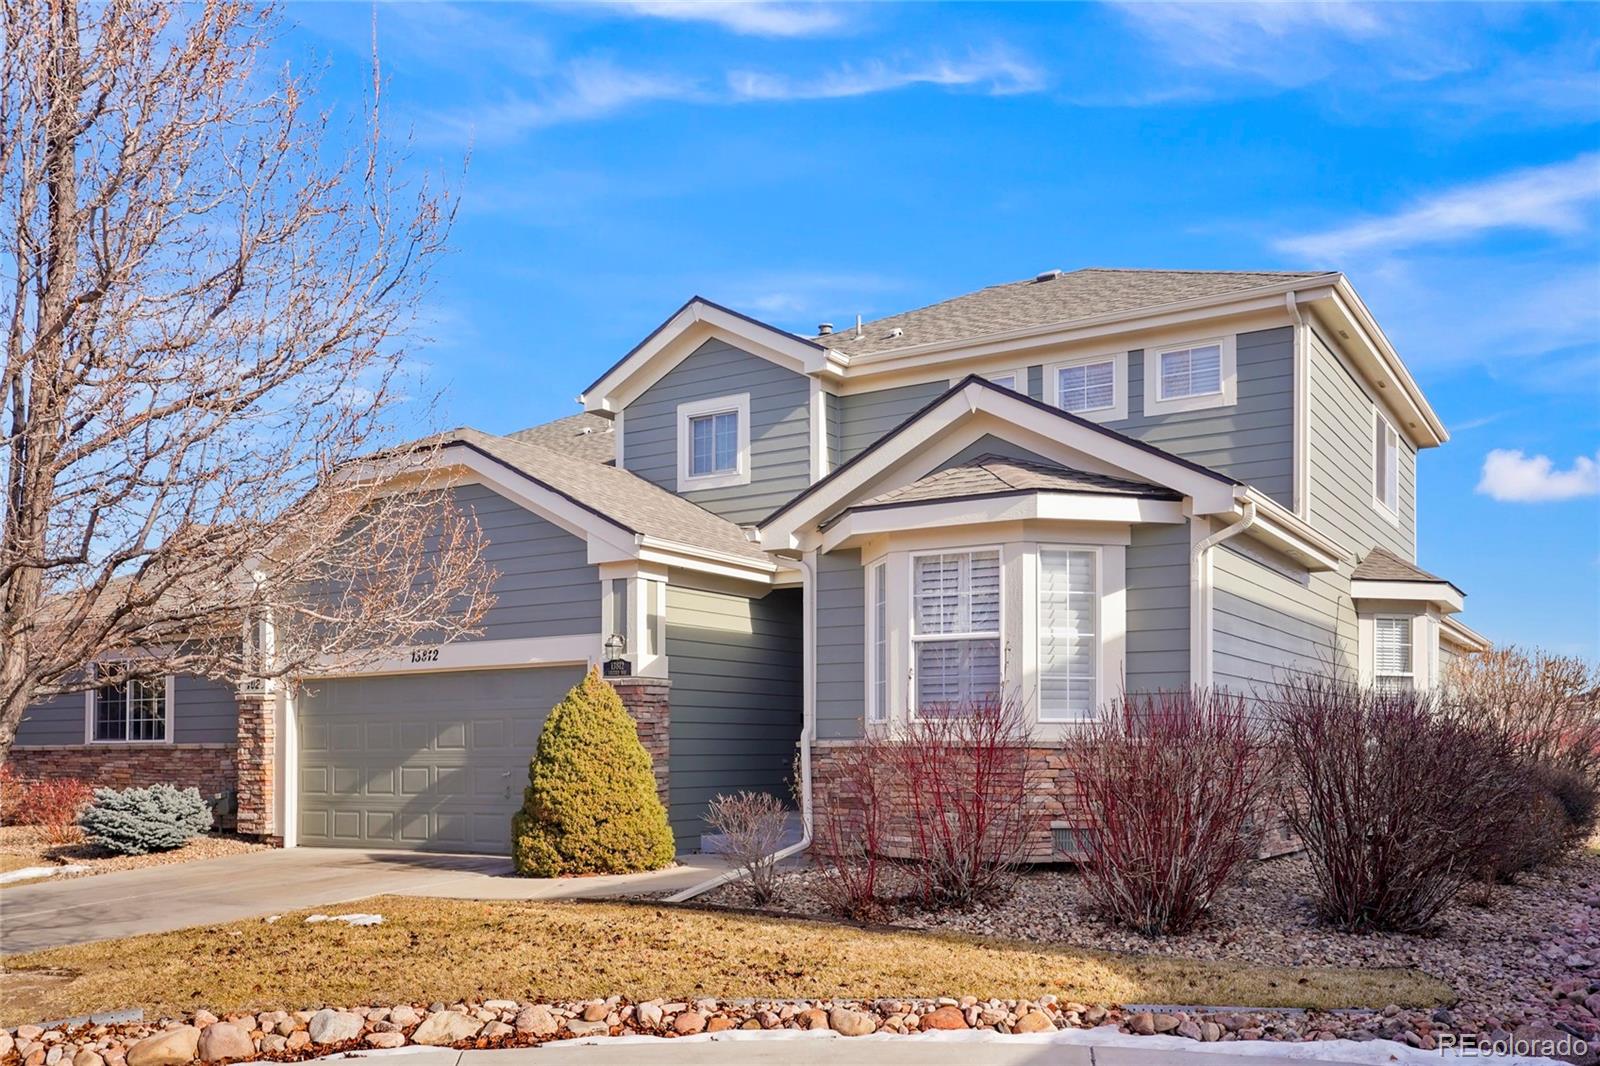 13812  legend way, Broomfield sold home. Closed on 2024-03-22 for $600,000.